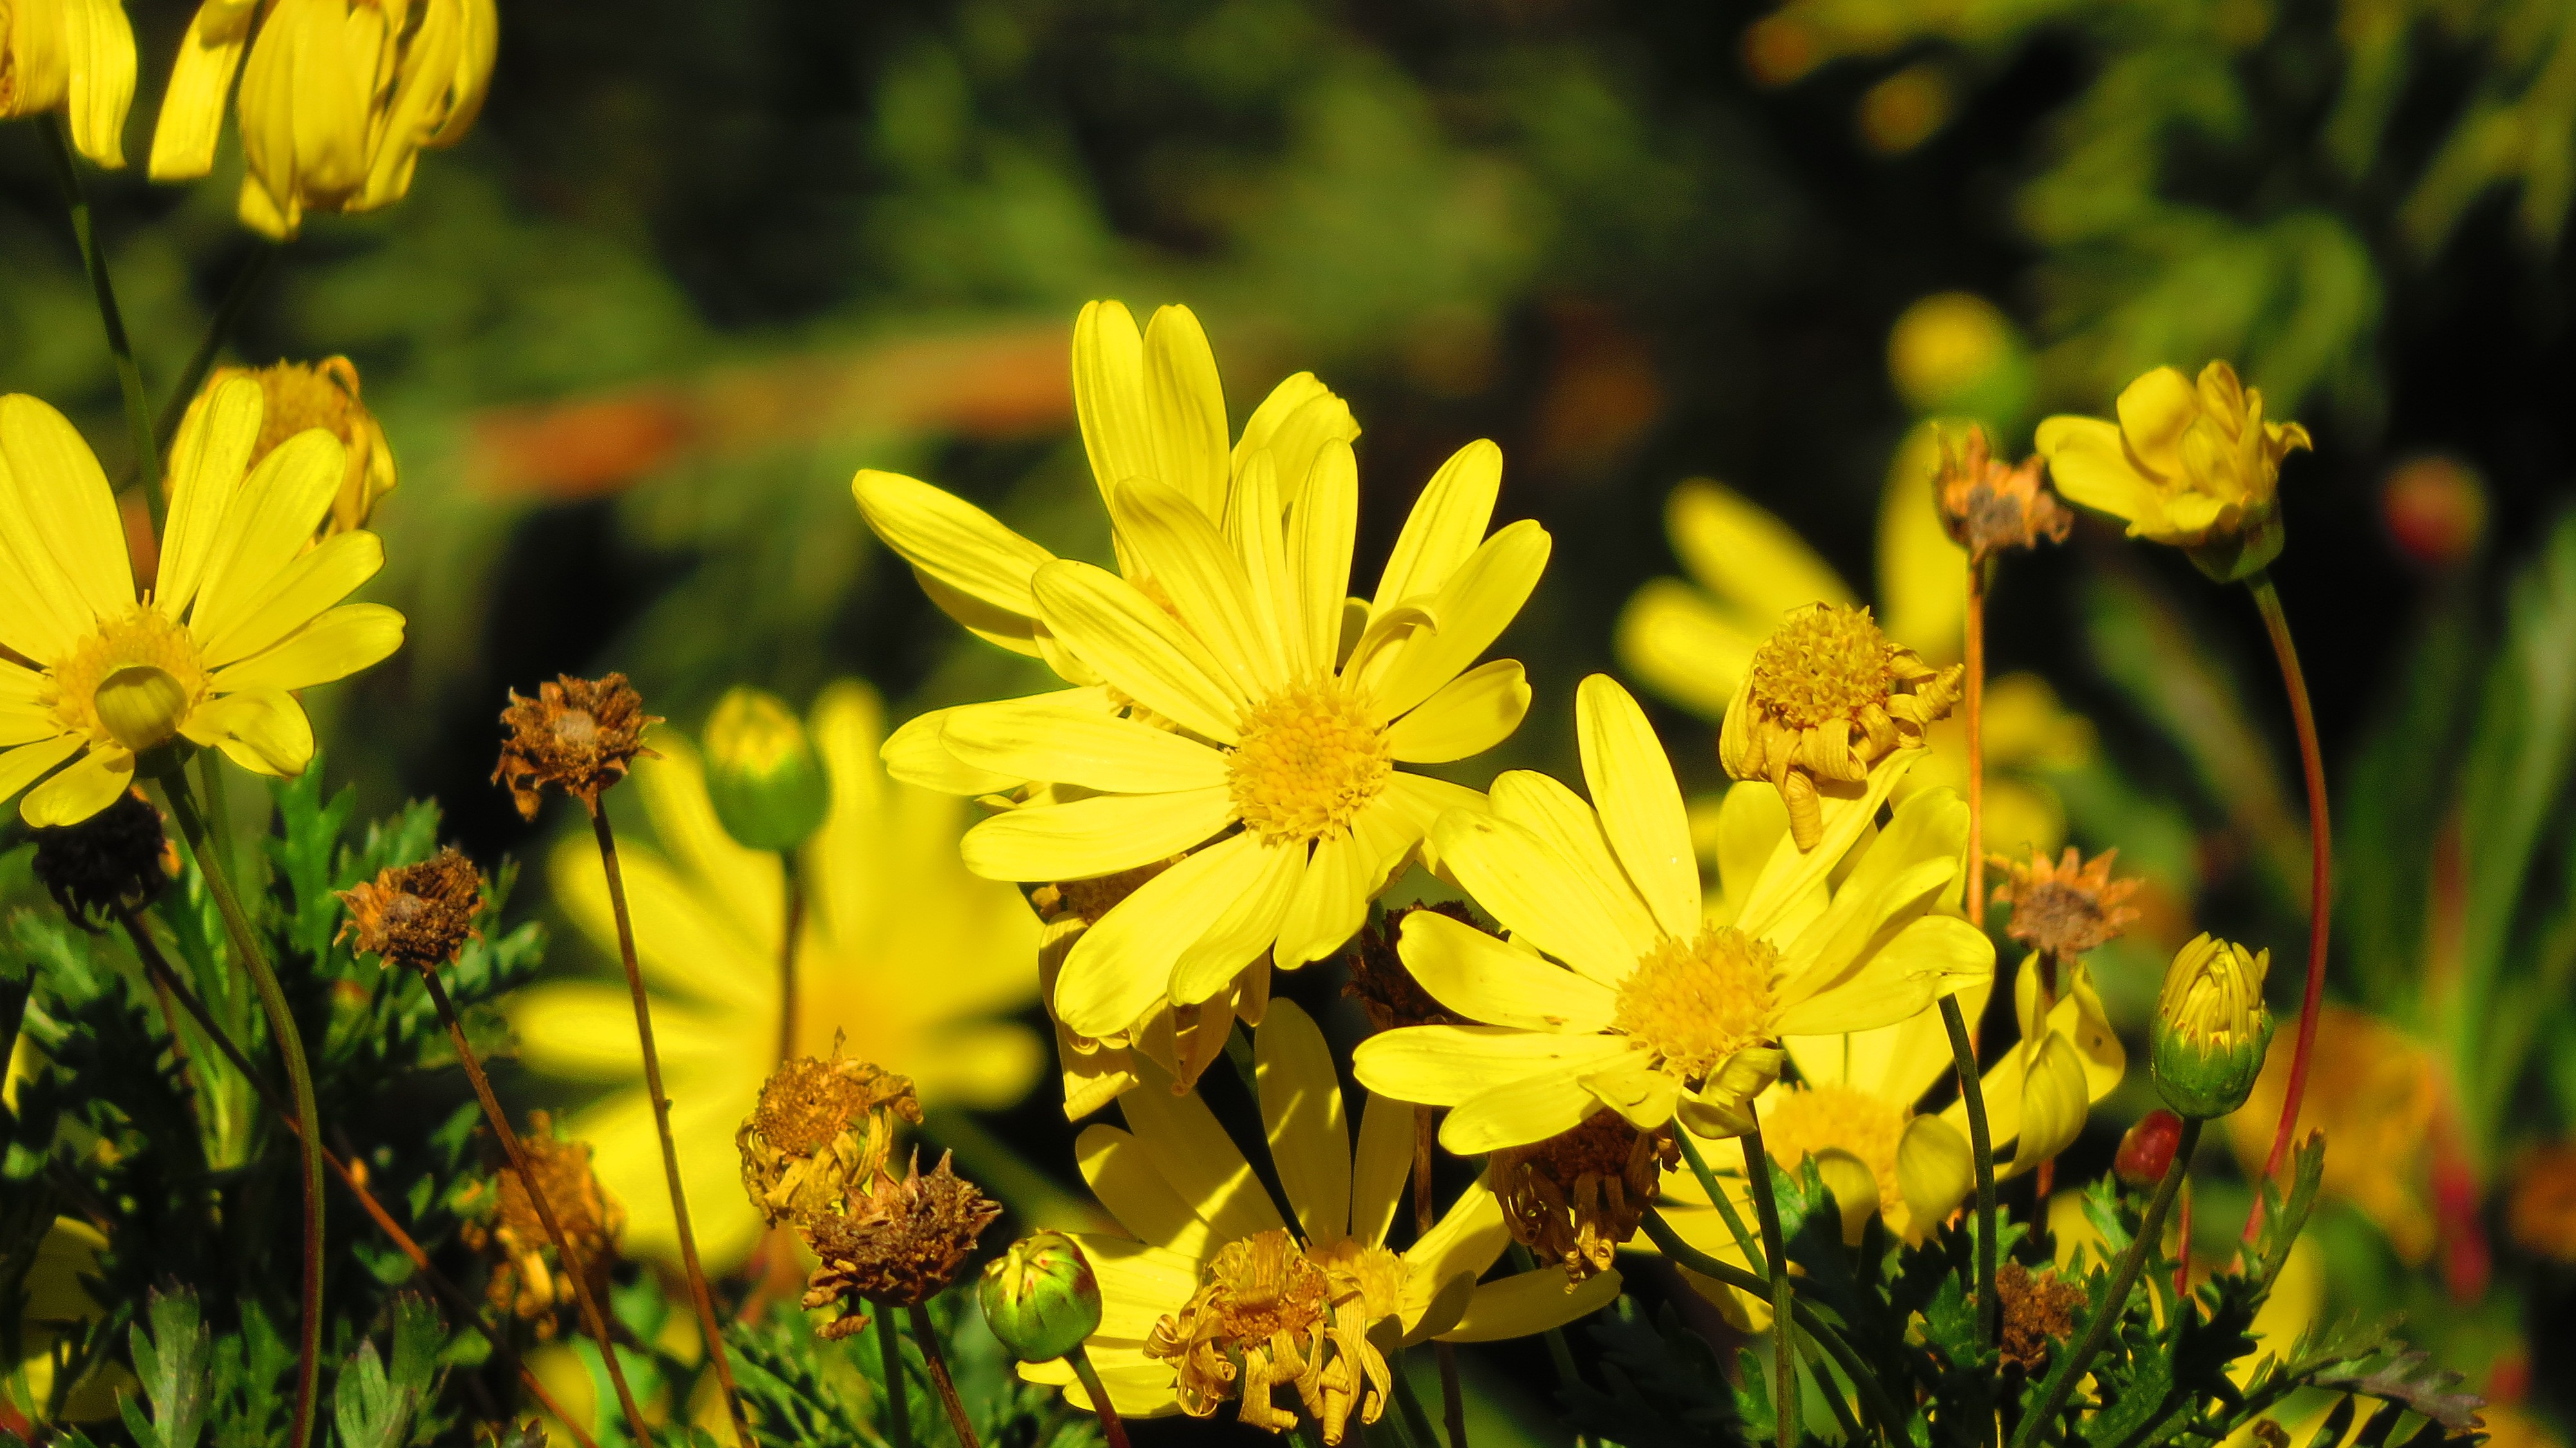 General 4000x2248 flowers yellow flowers bees nature